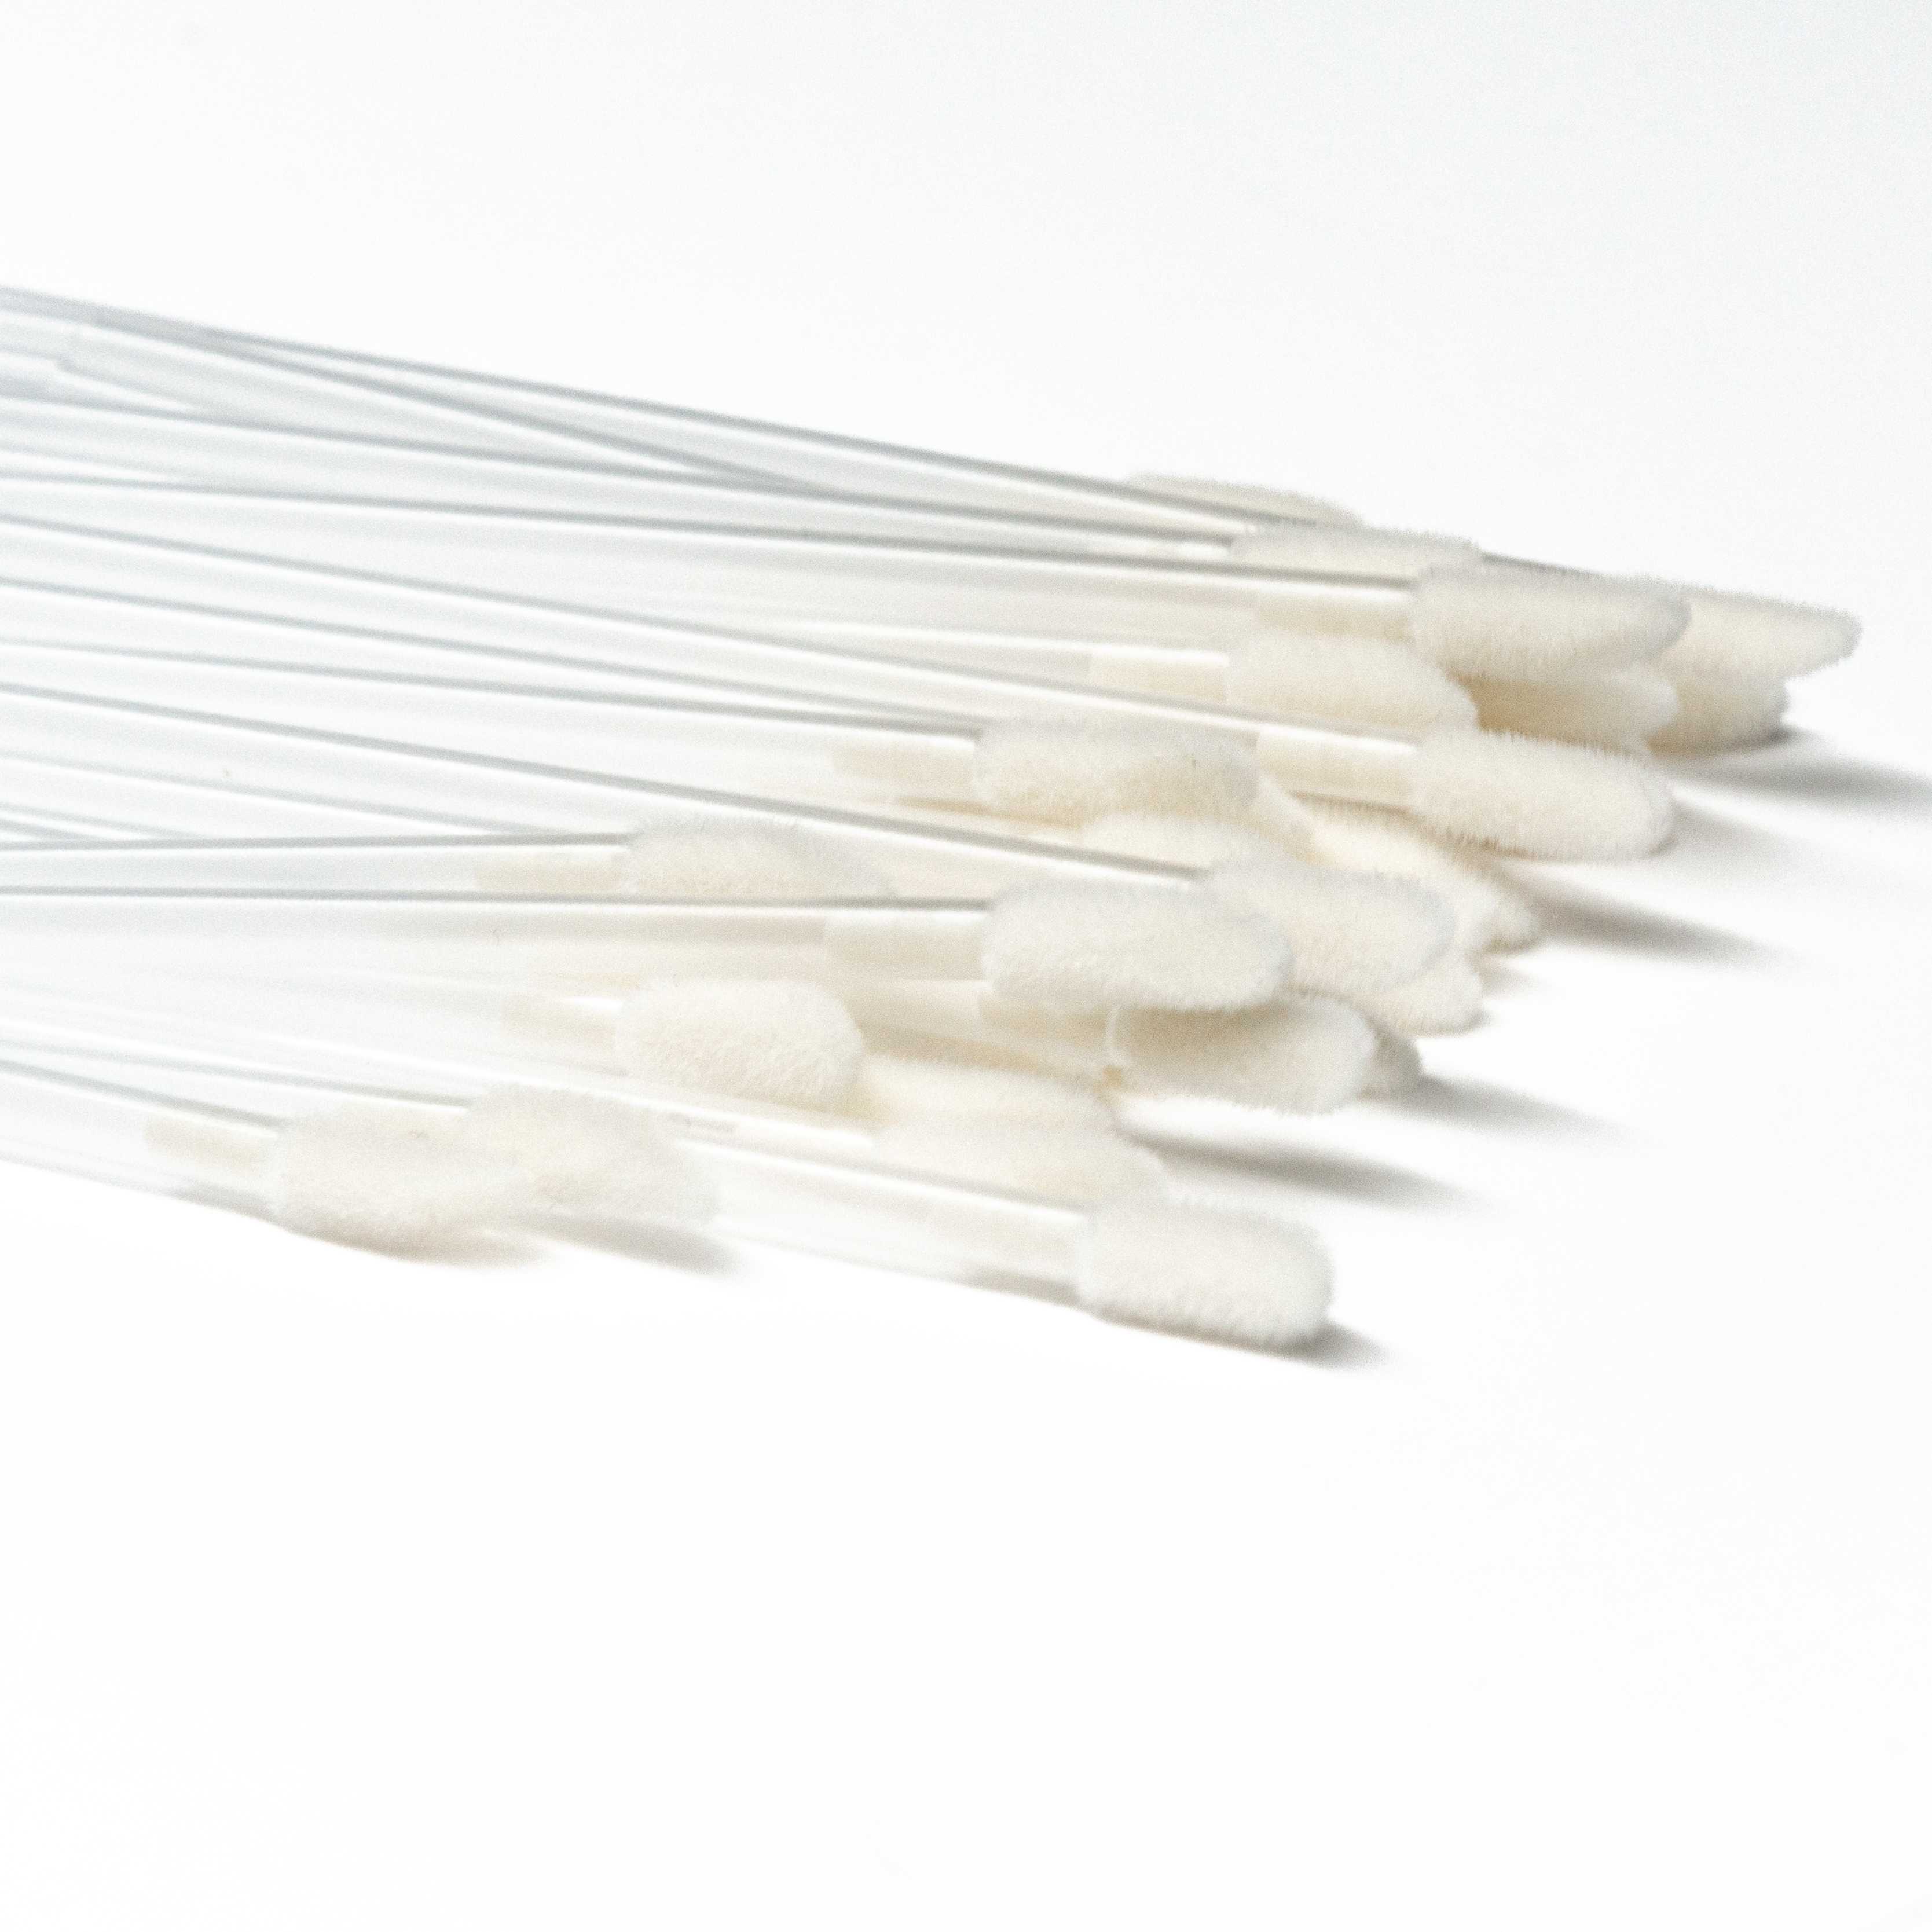 A pile of 50 disposable applicator wands on a white background